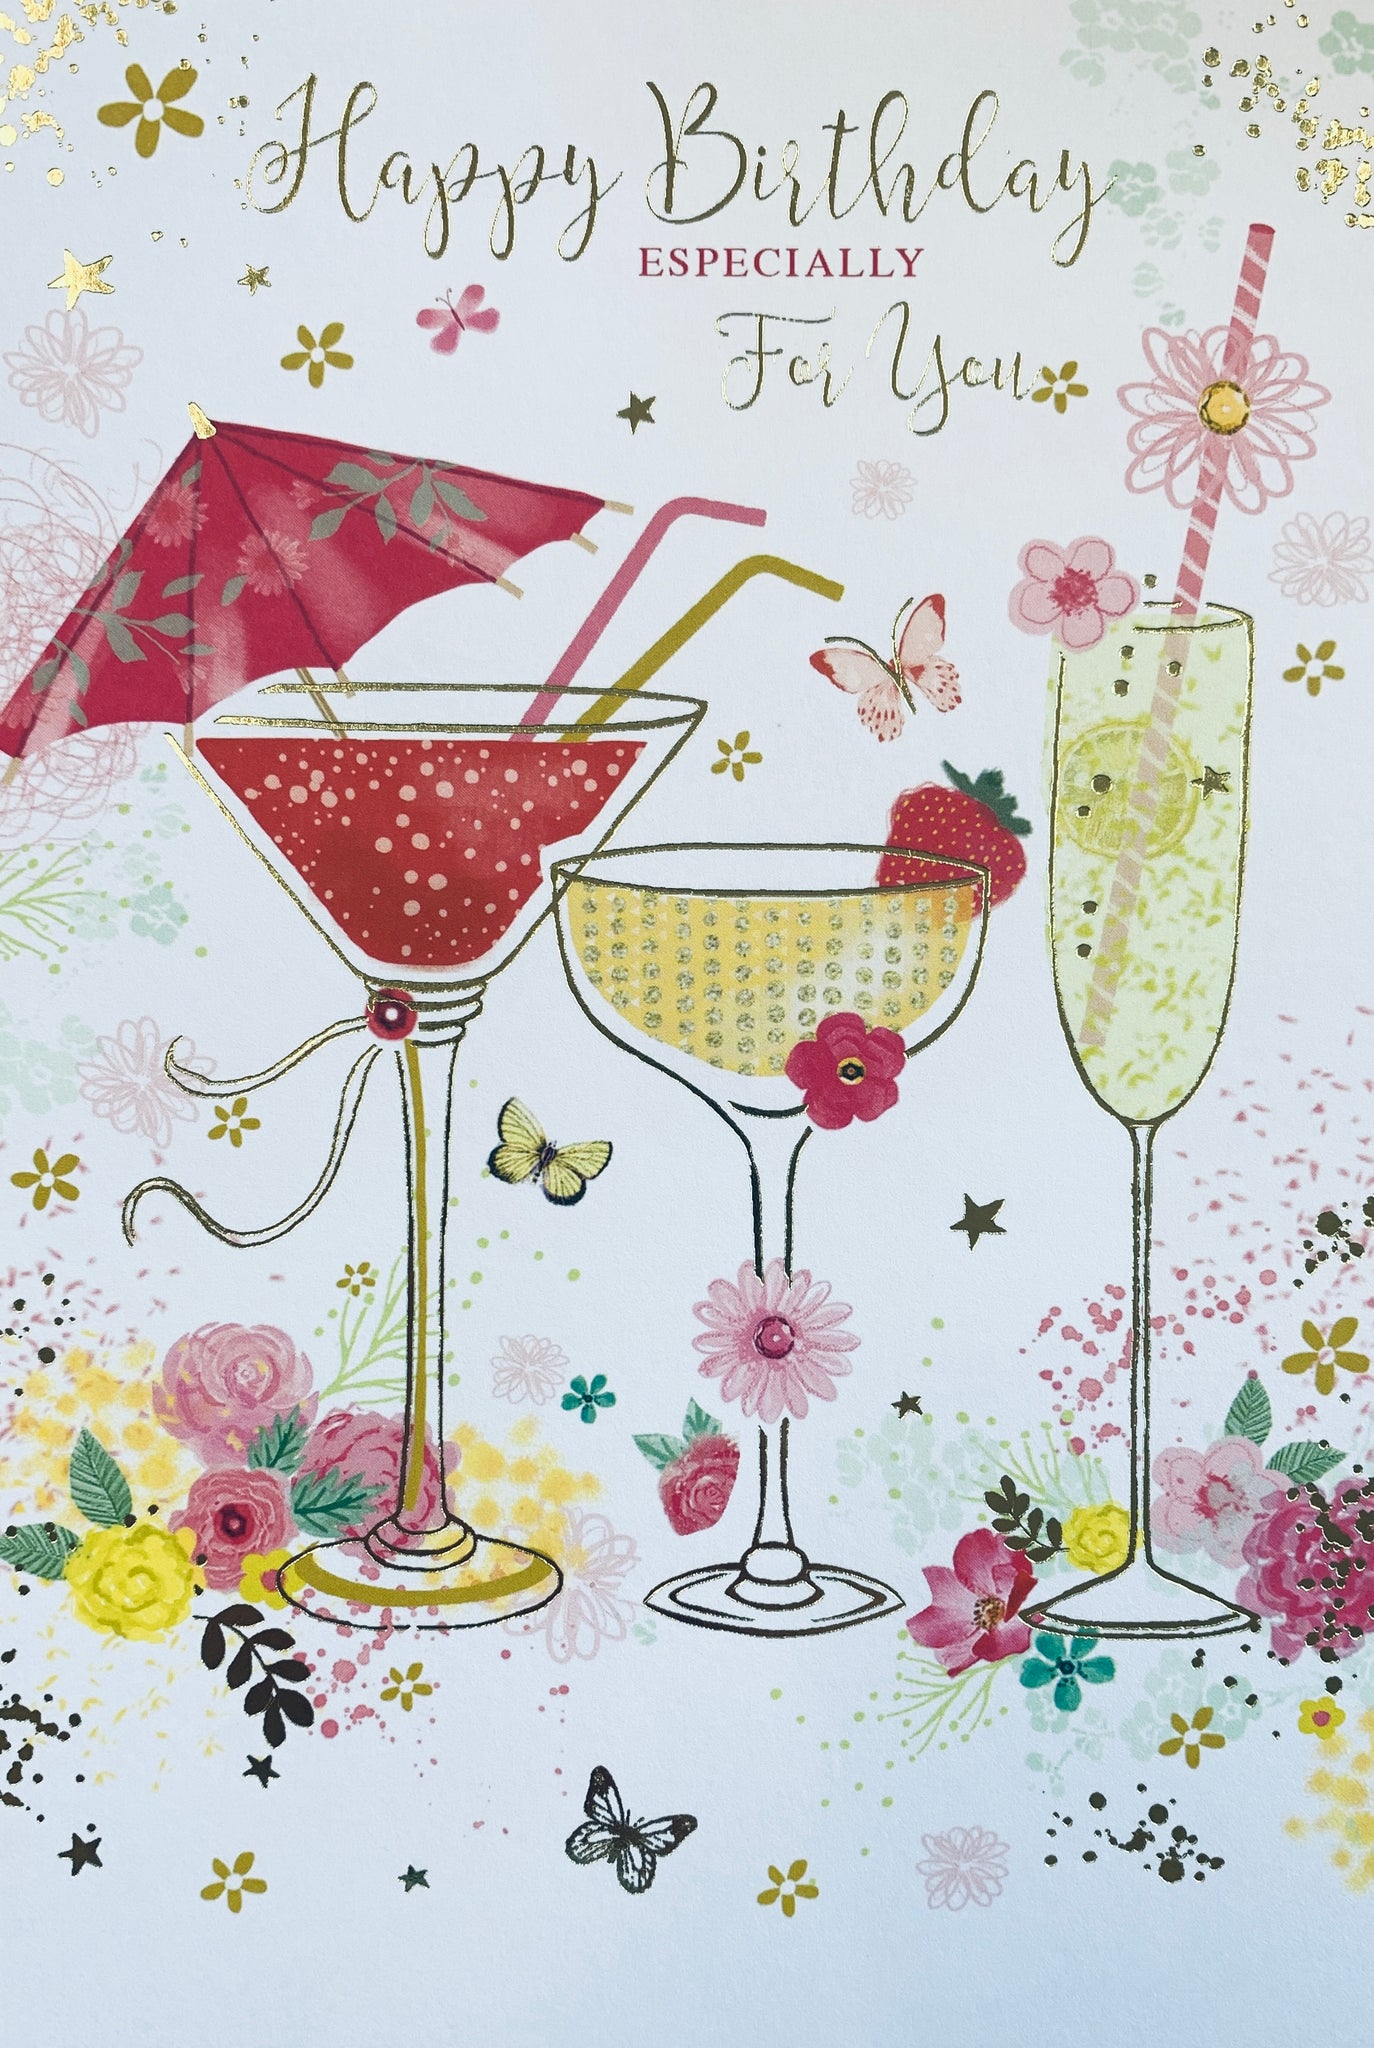 Birthday card for her - birthday cocktails